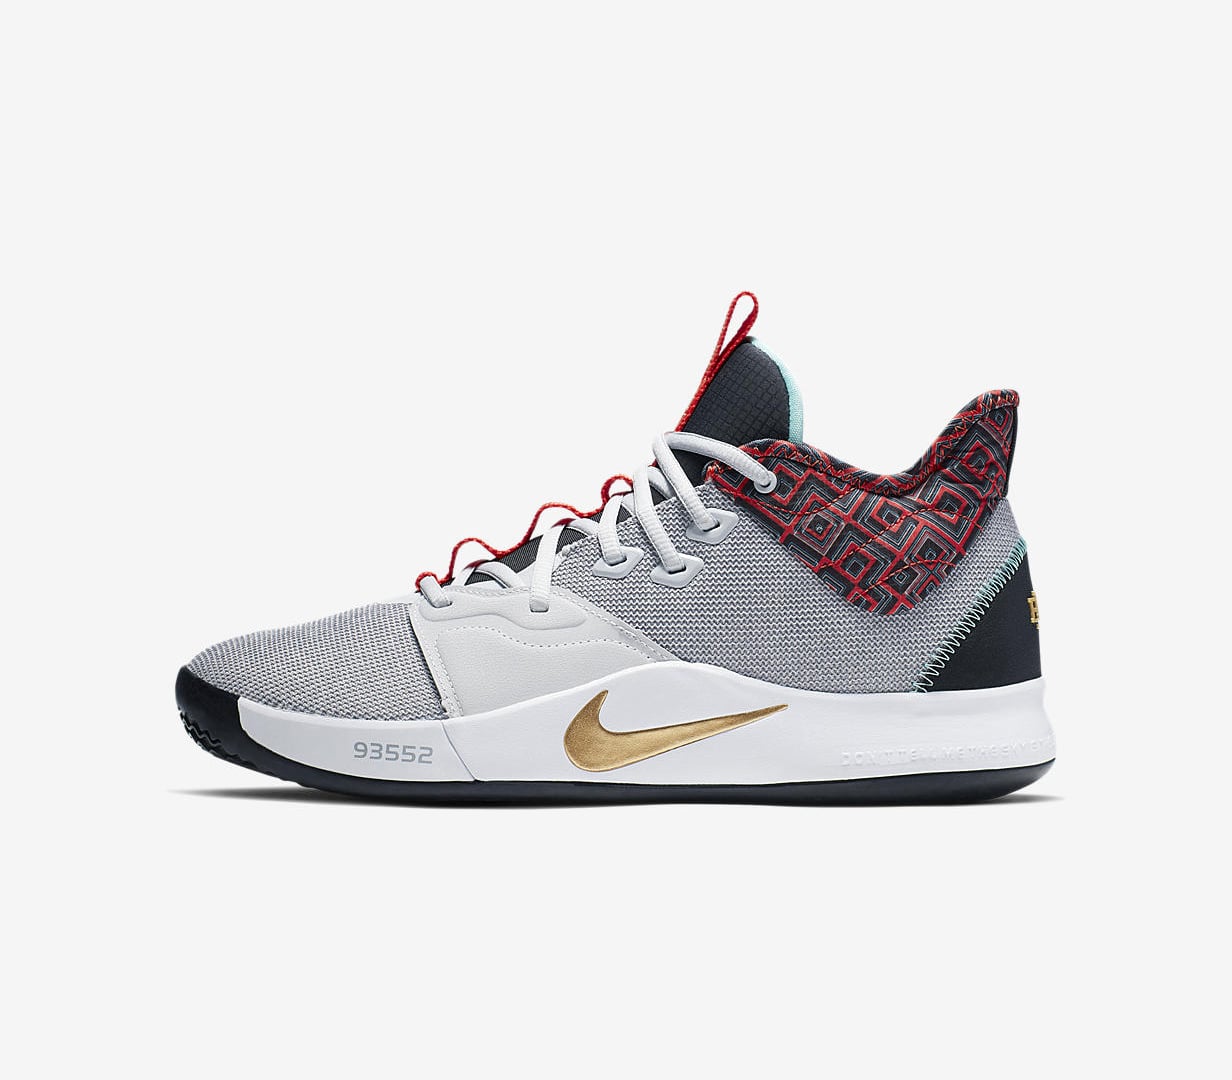 Where to Buy the Nike PG 3 “BHM” | House of Heat°